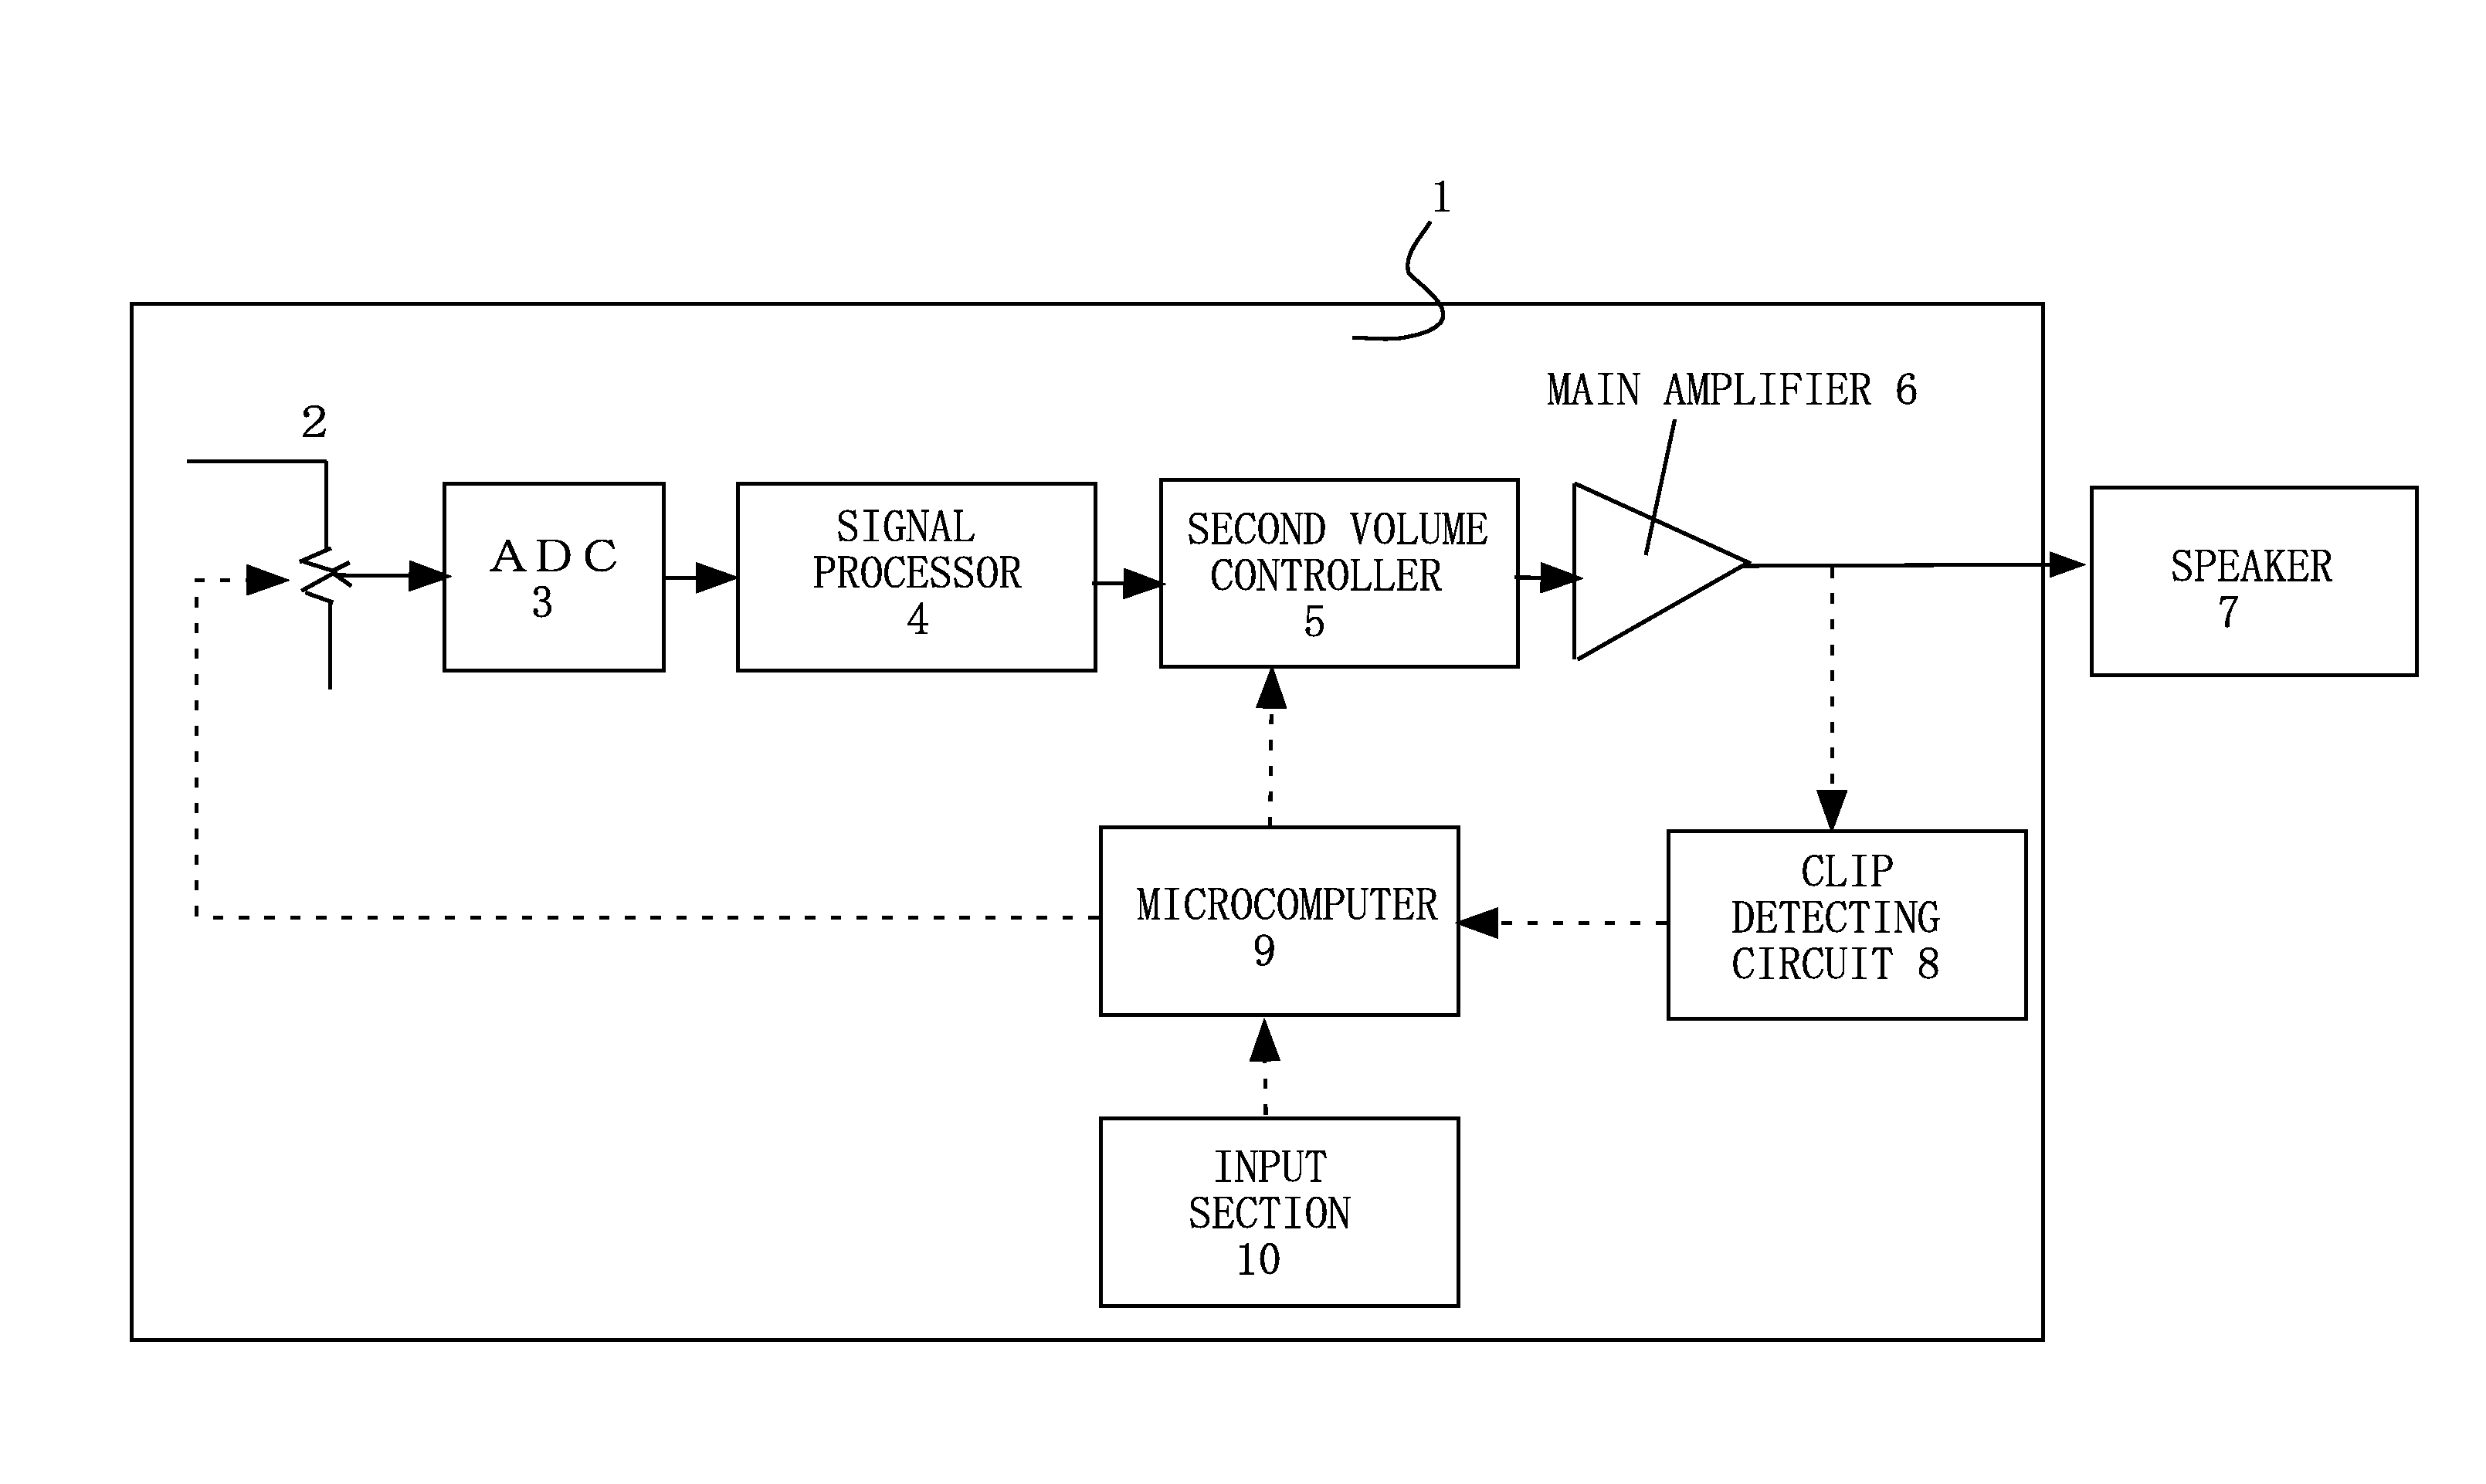 Volume control apparatus with first and second controllers